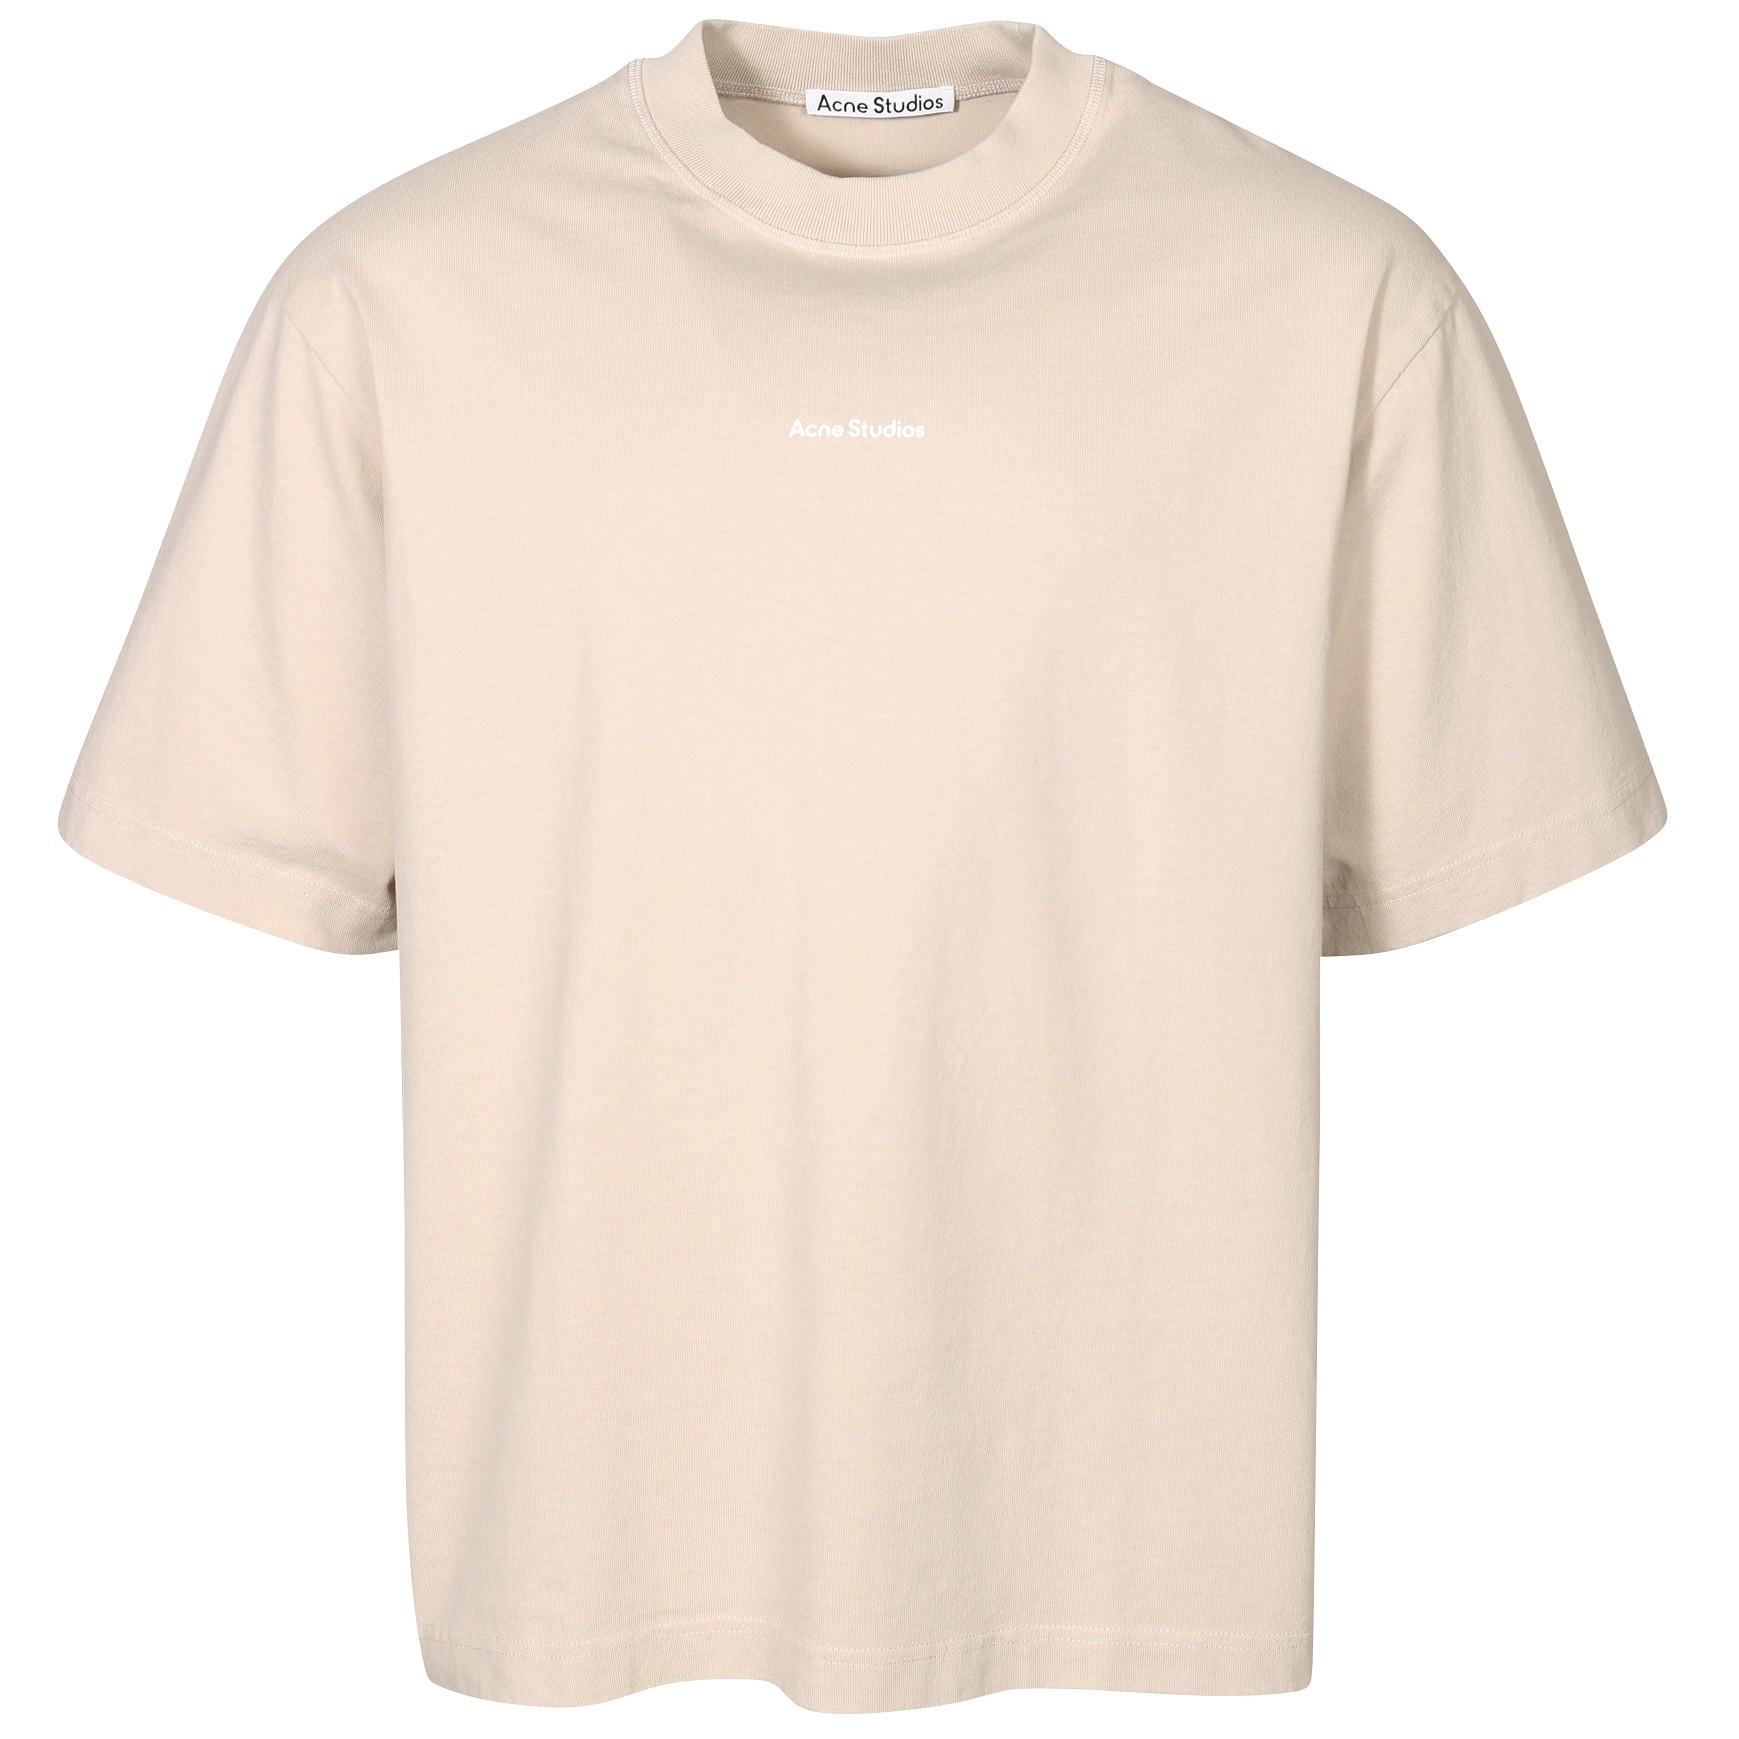 ACNE STUDIOS Loose Fit Stamp T-Shirt in Champagne Beige XL